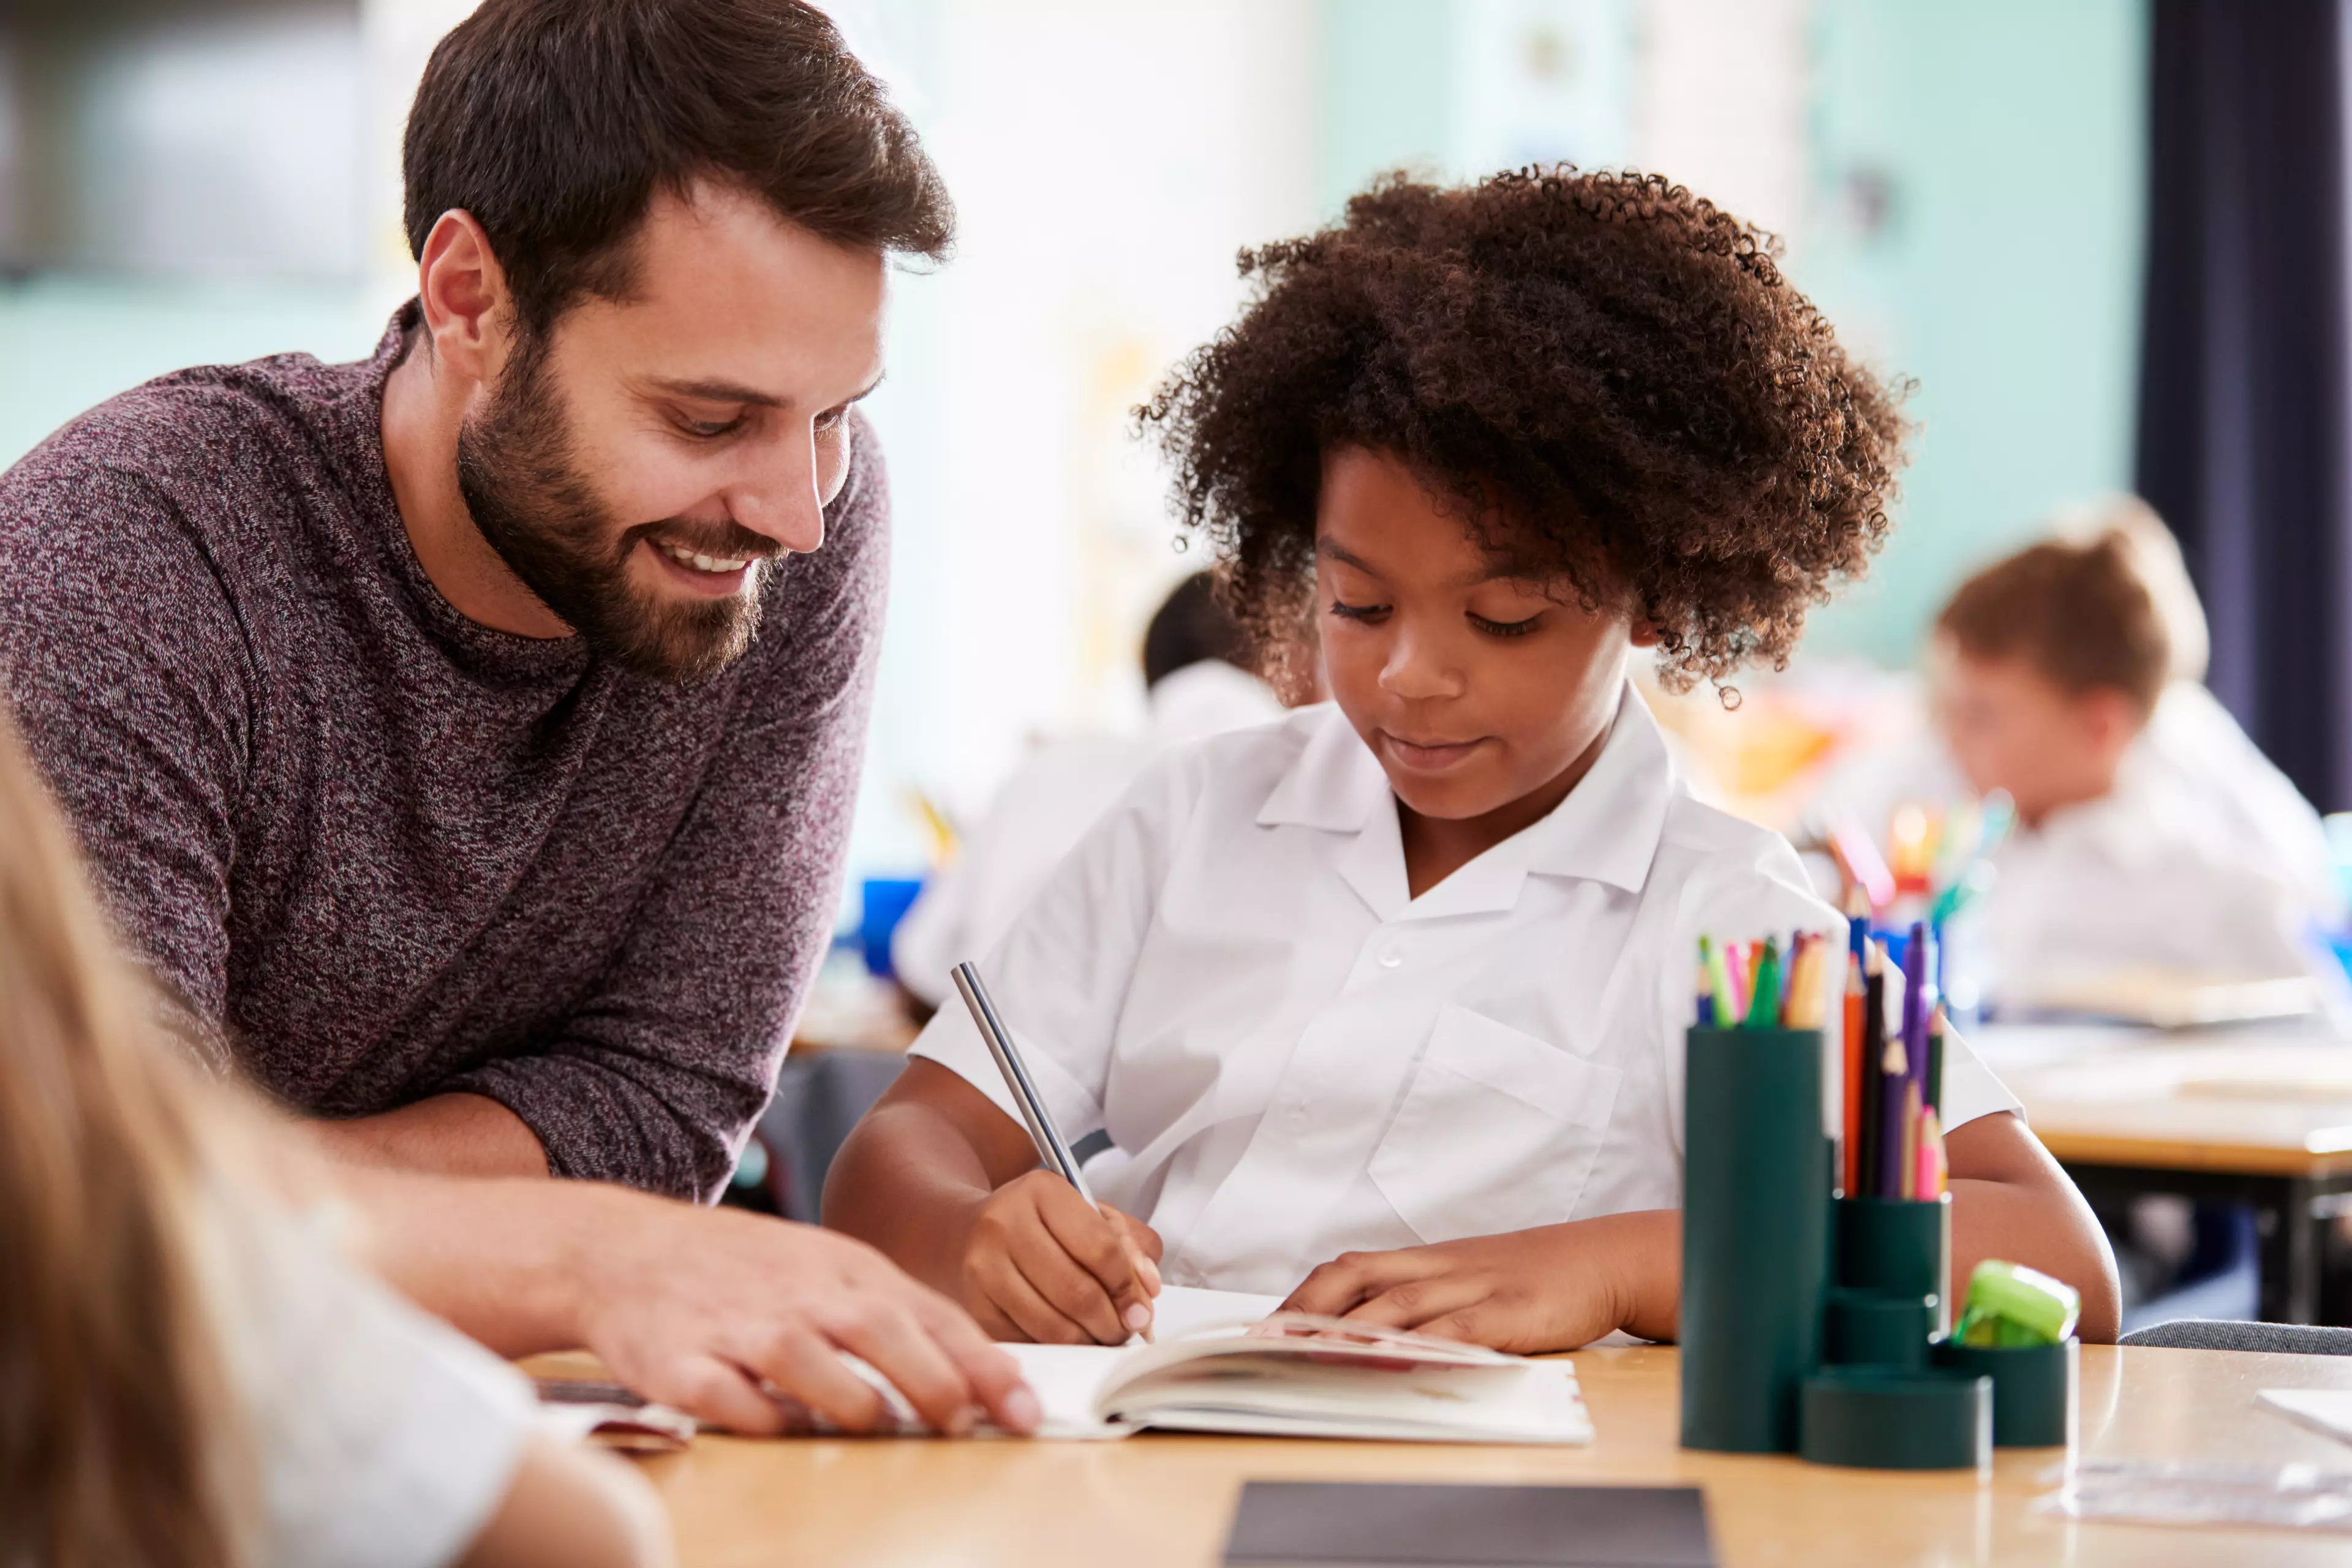 Smiling male teacher with a kid student sitting behind a desk